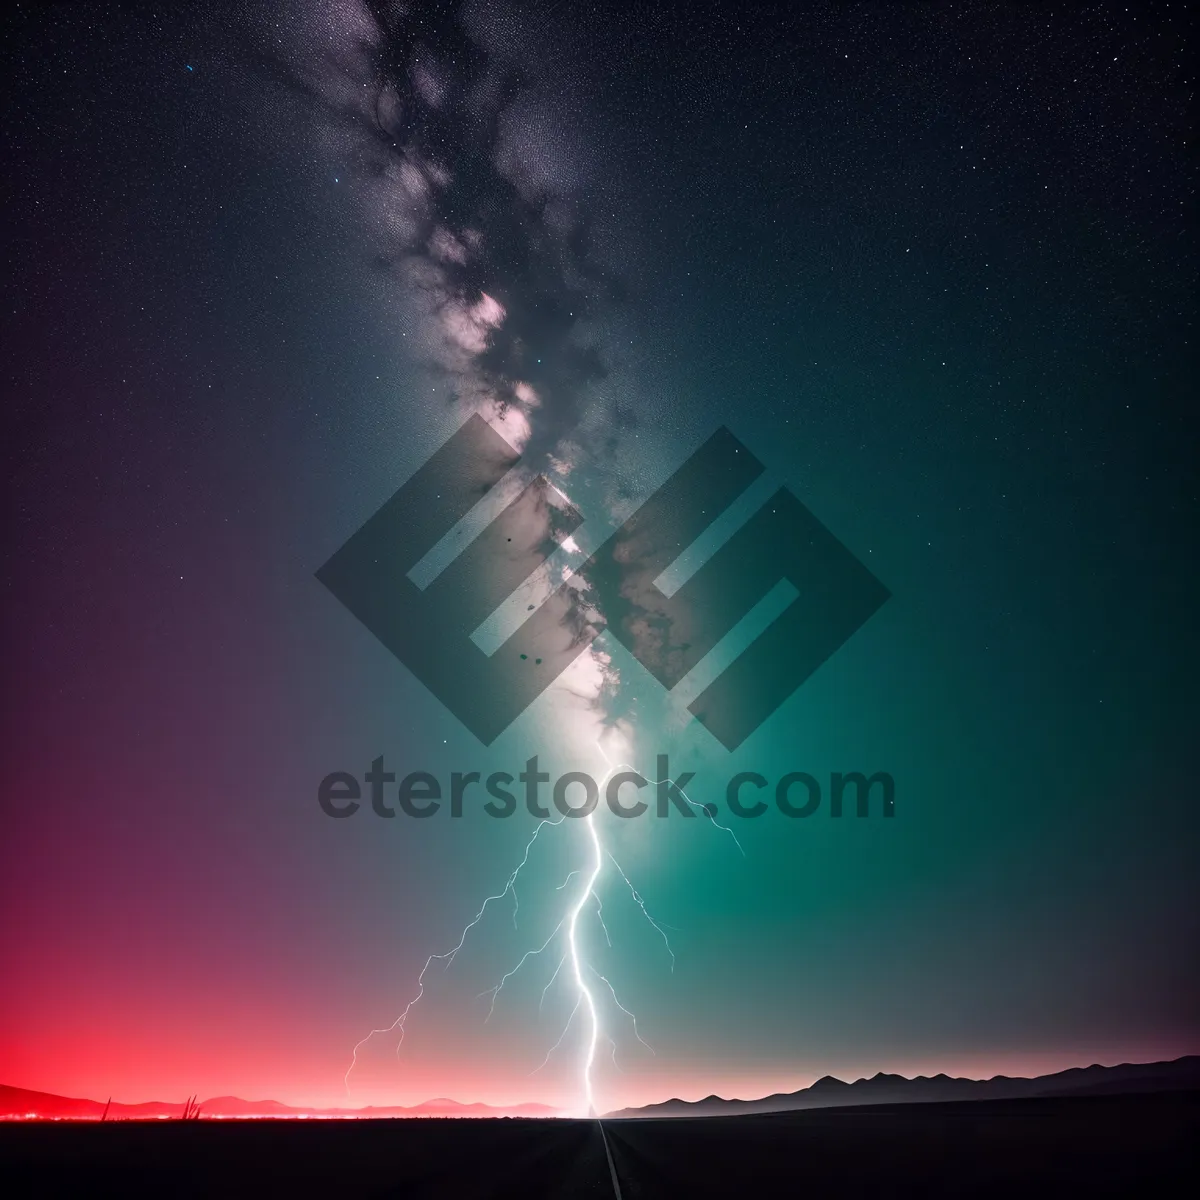 Picture of Electric Thunderbolt Piercing Dark Stormy Skies